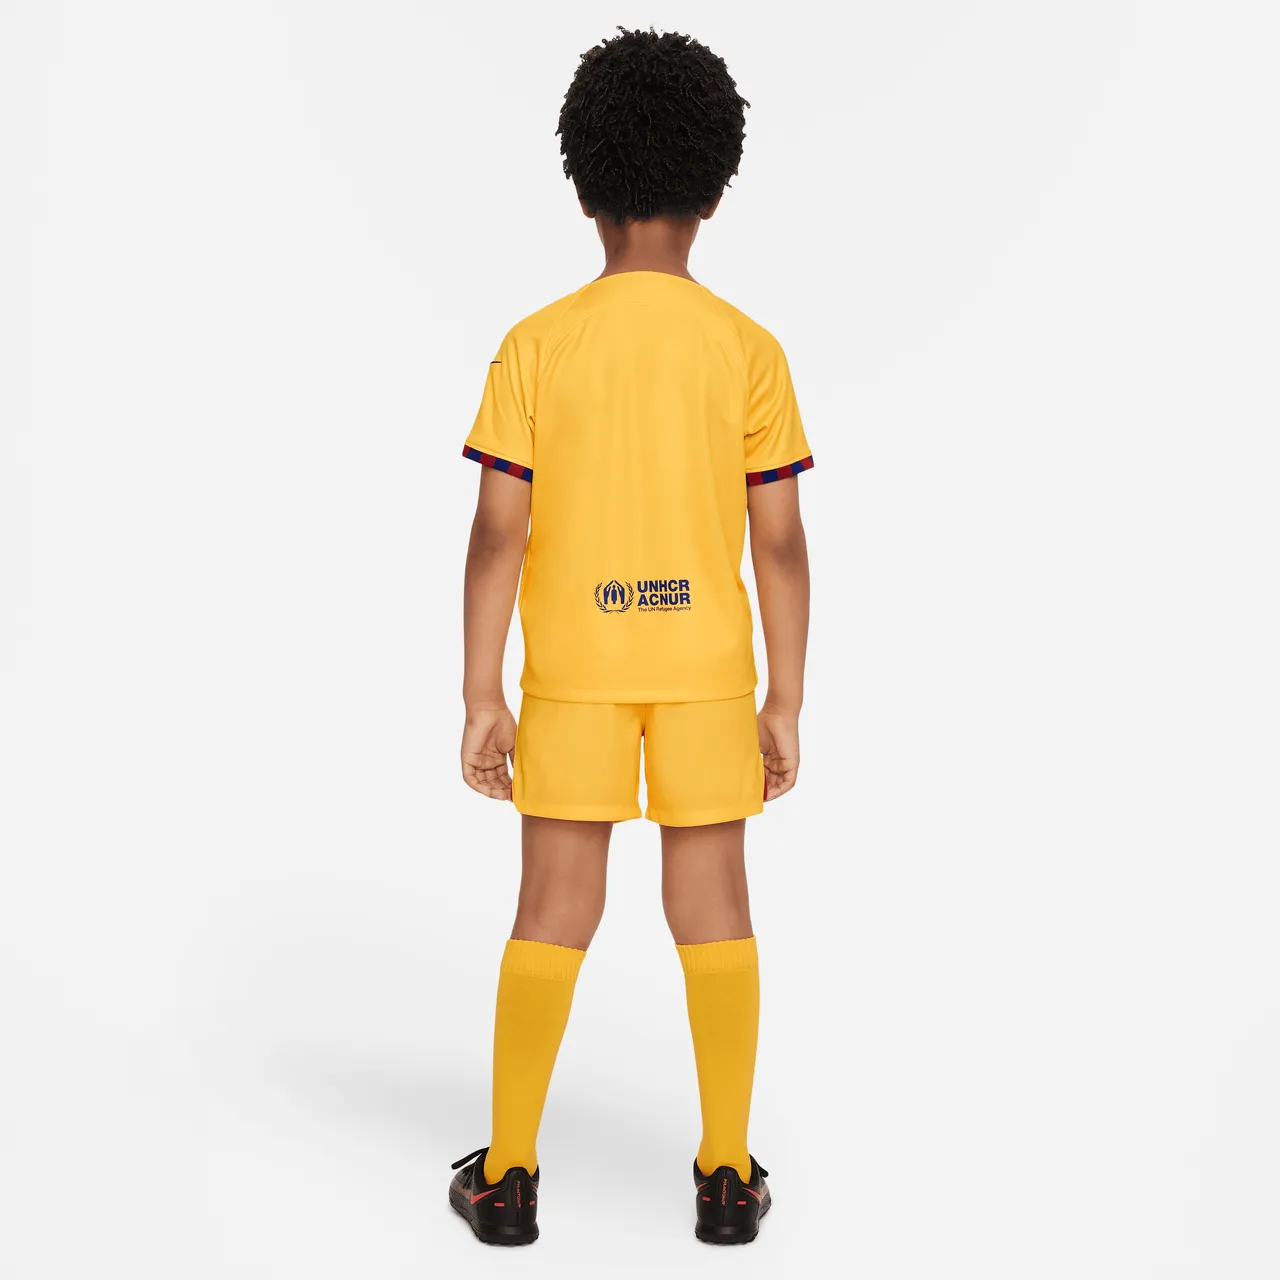 F.C. Barcelona 2023/24 Fourth Younger Kids' Nike Football Kit - Yellow - Polyester